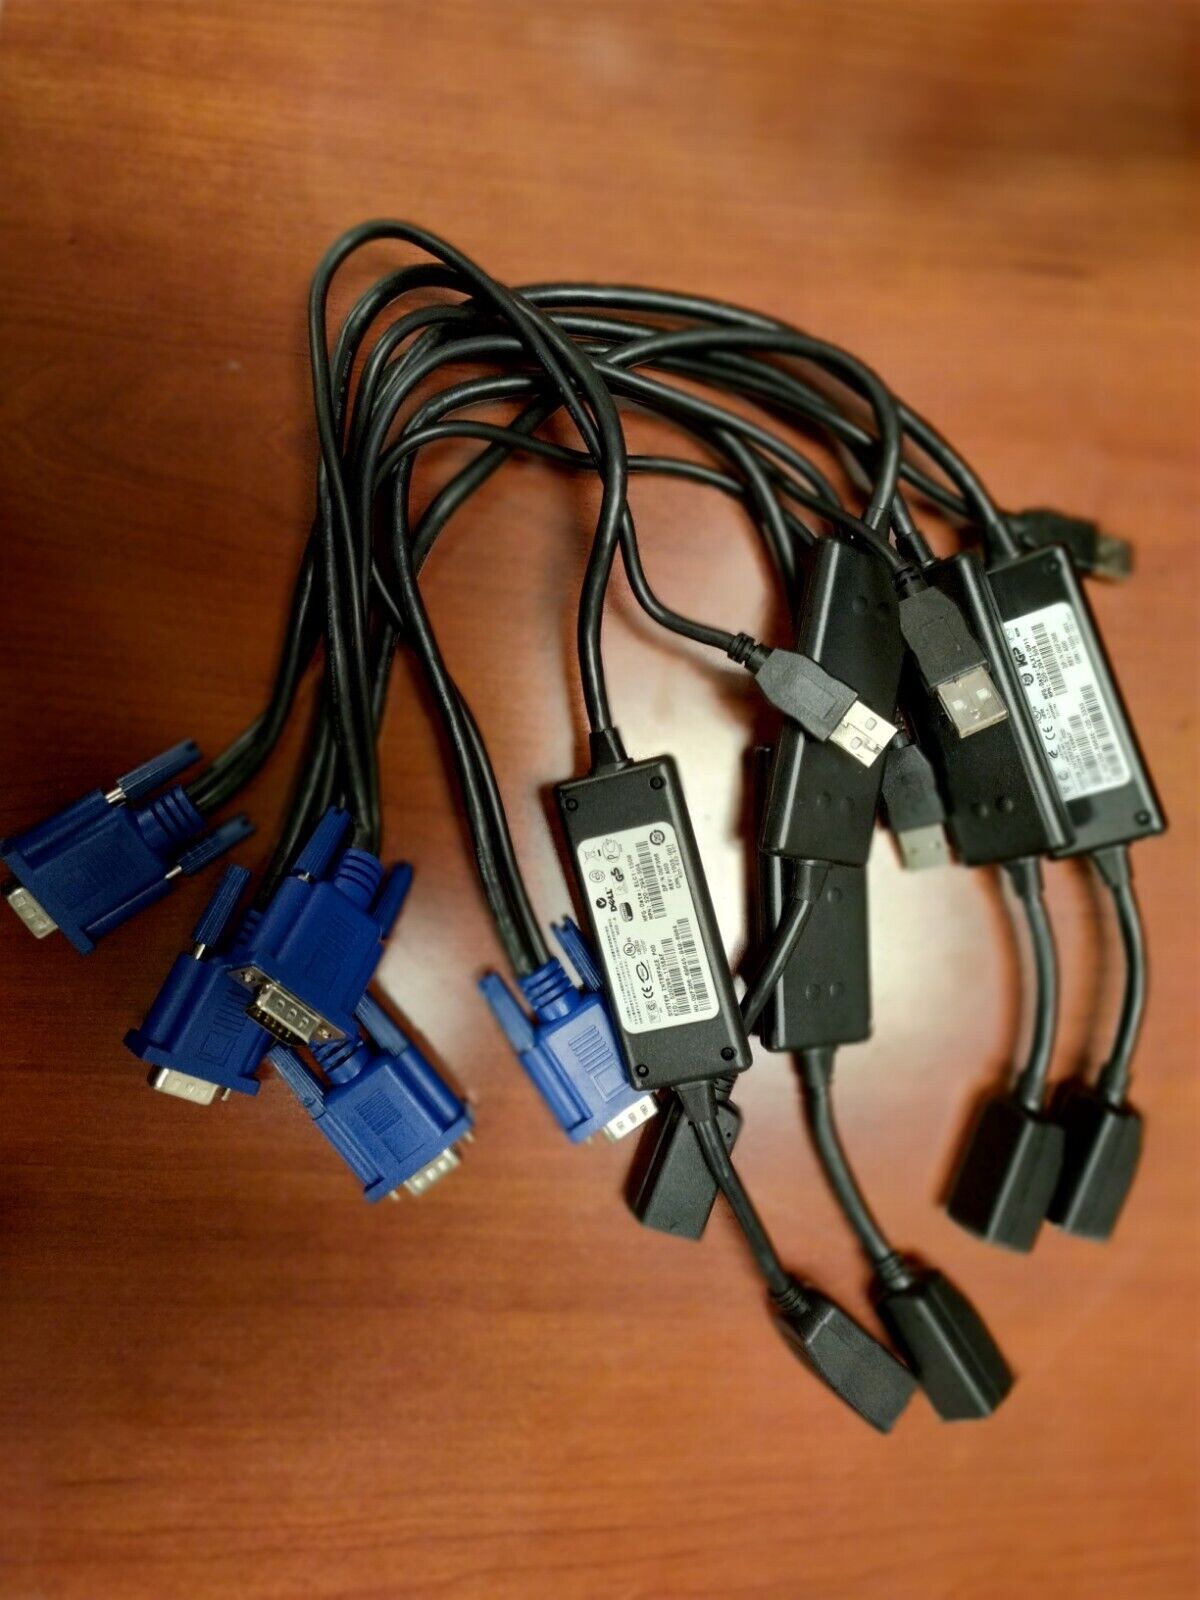 Lot of 5 Dell OUF366 - KVM Switch System Interface Adapter Cable; Refurbished